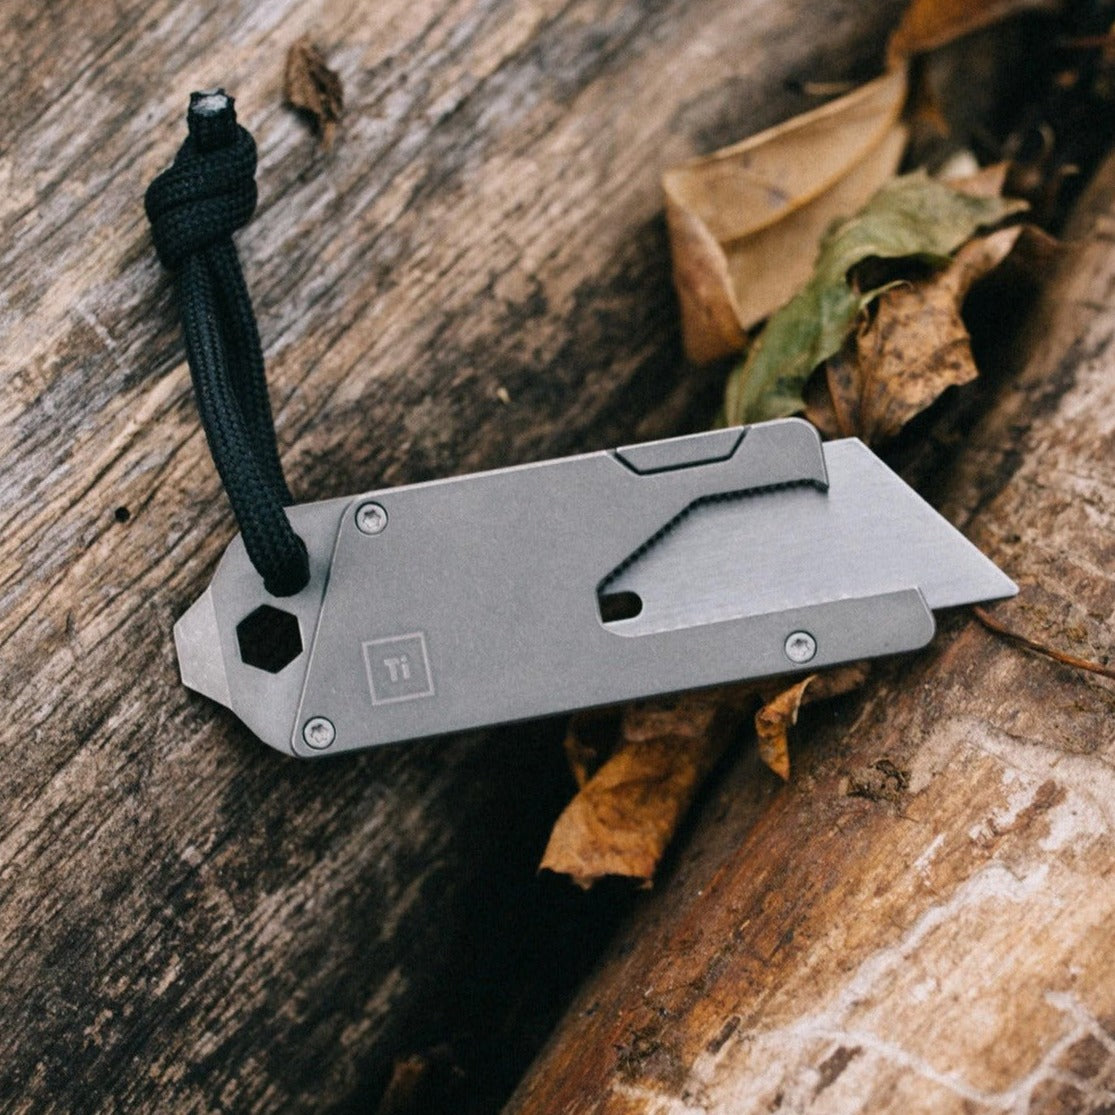 NutSac's Guide to the Best Everyday Carry Gadgets